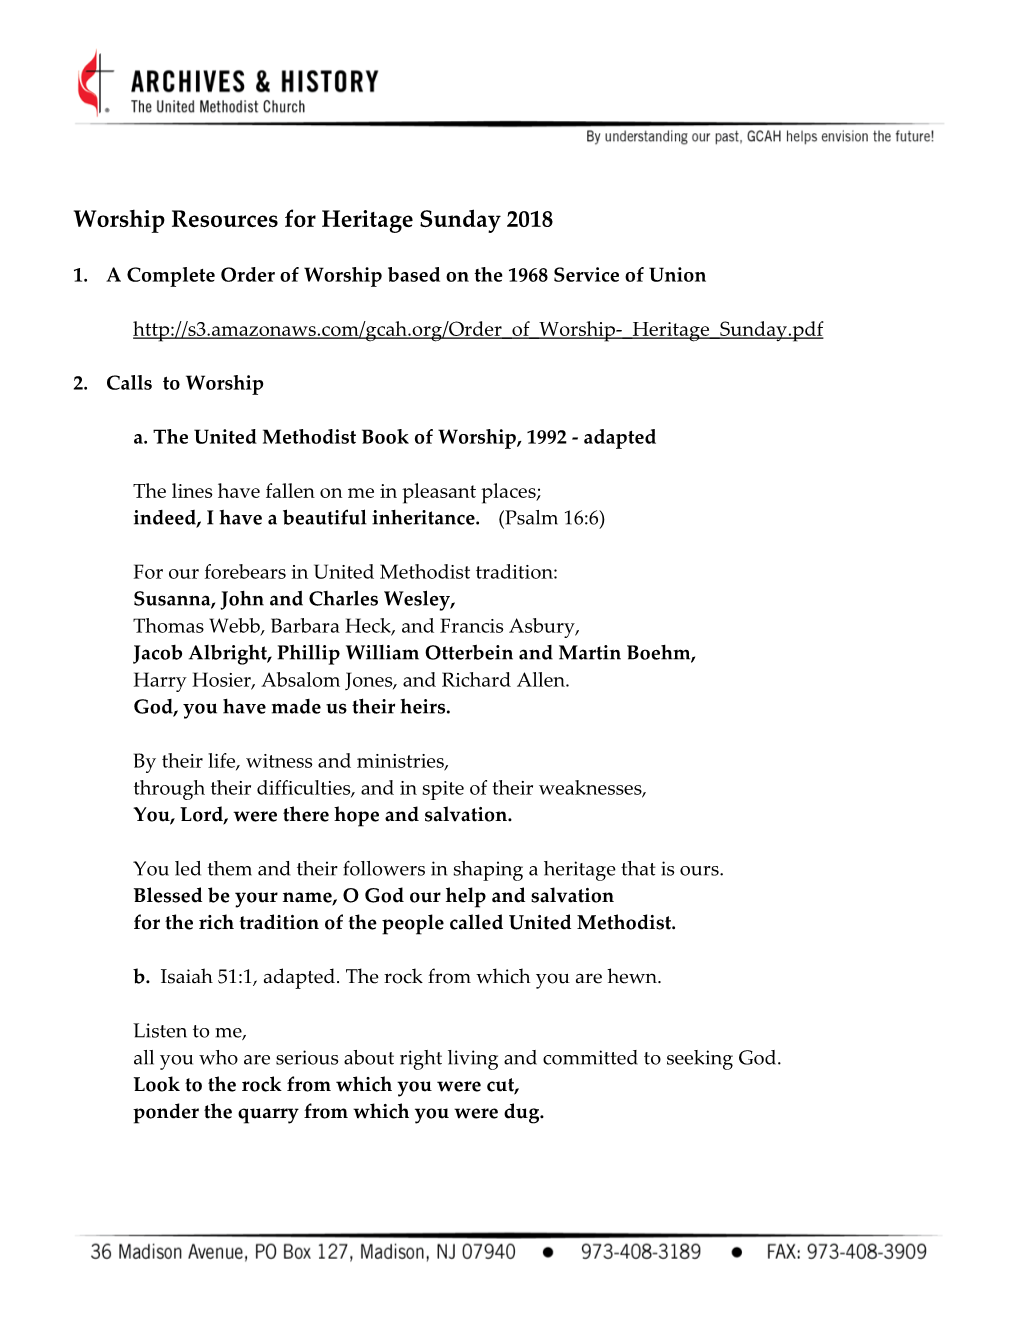 Worship Resources for Heritage Sunday 2018